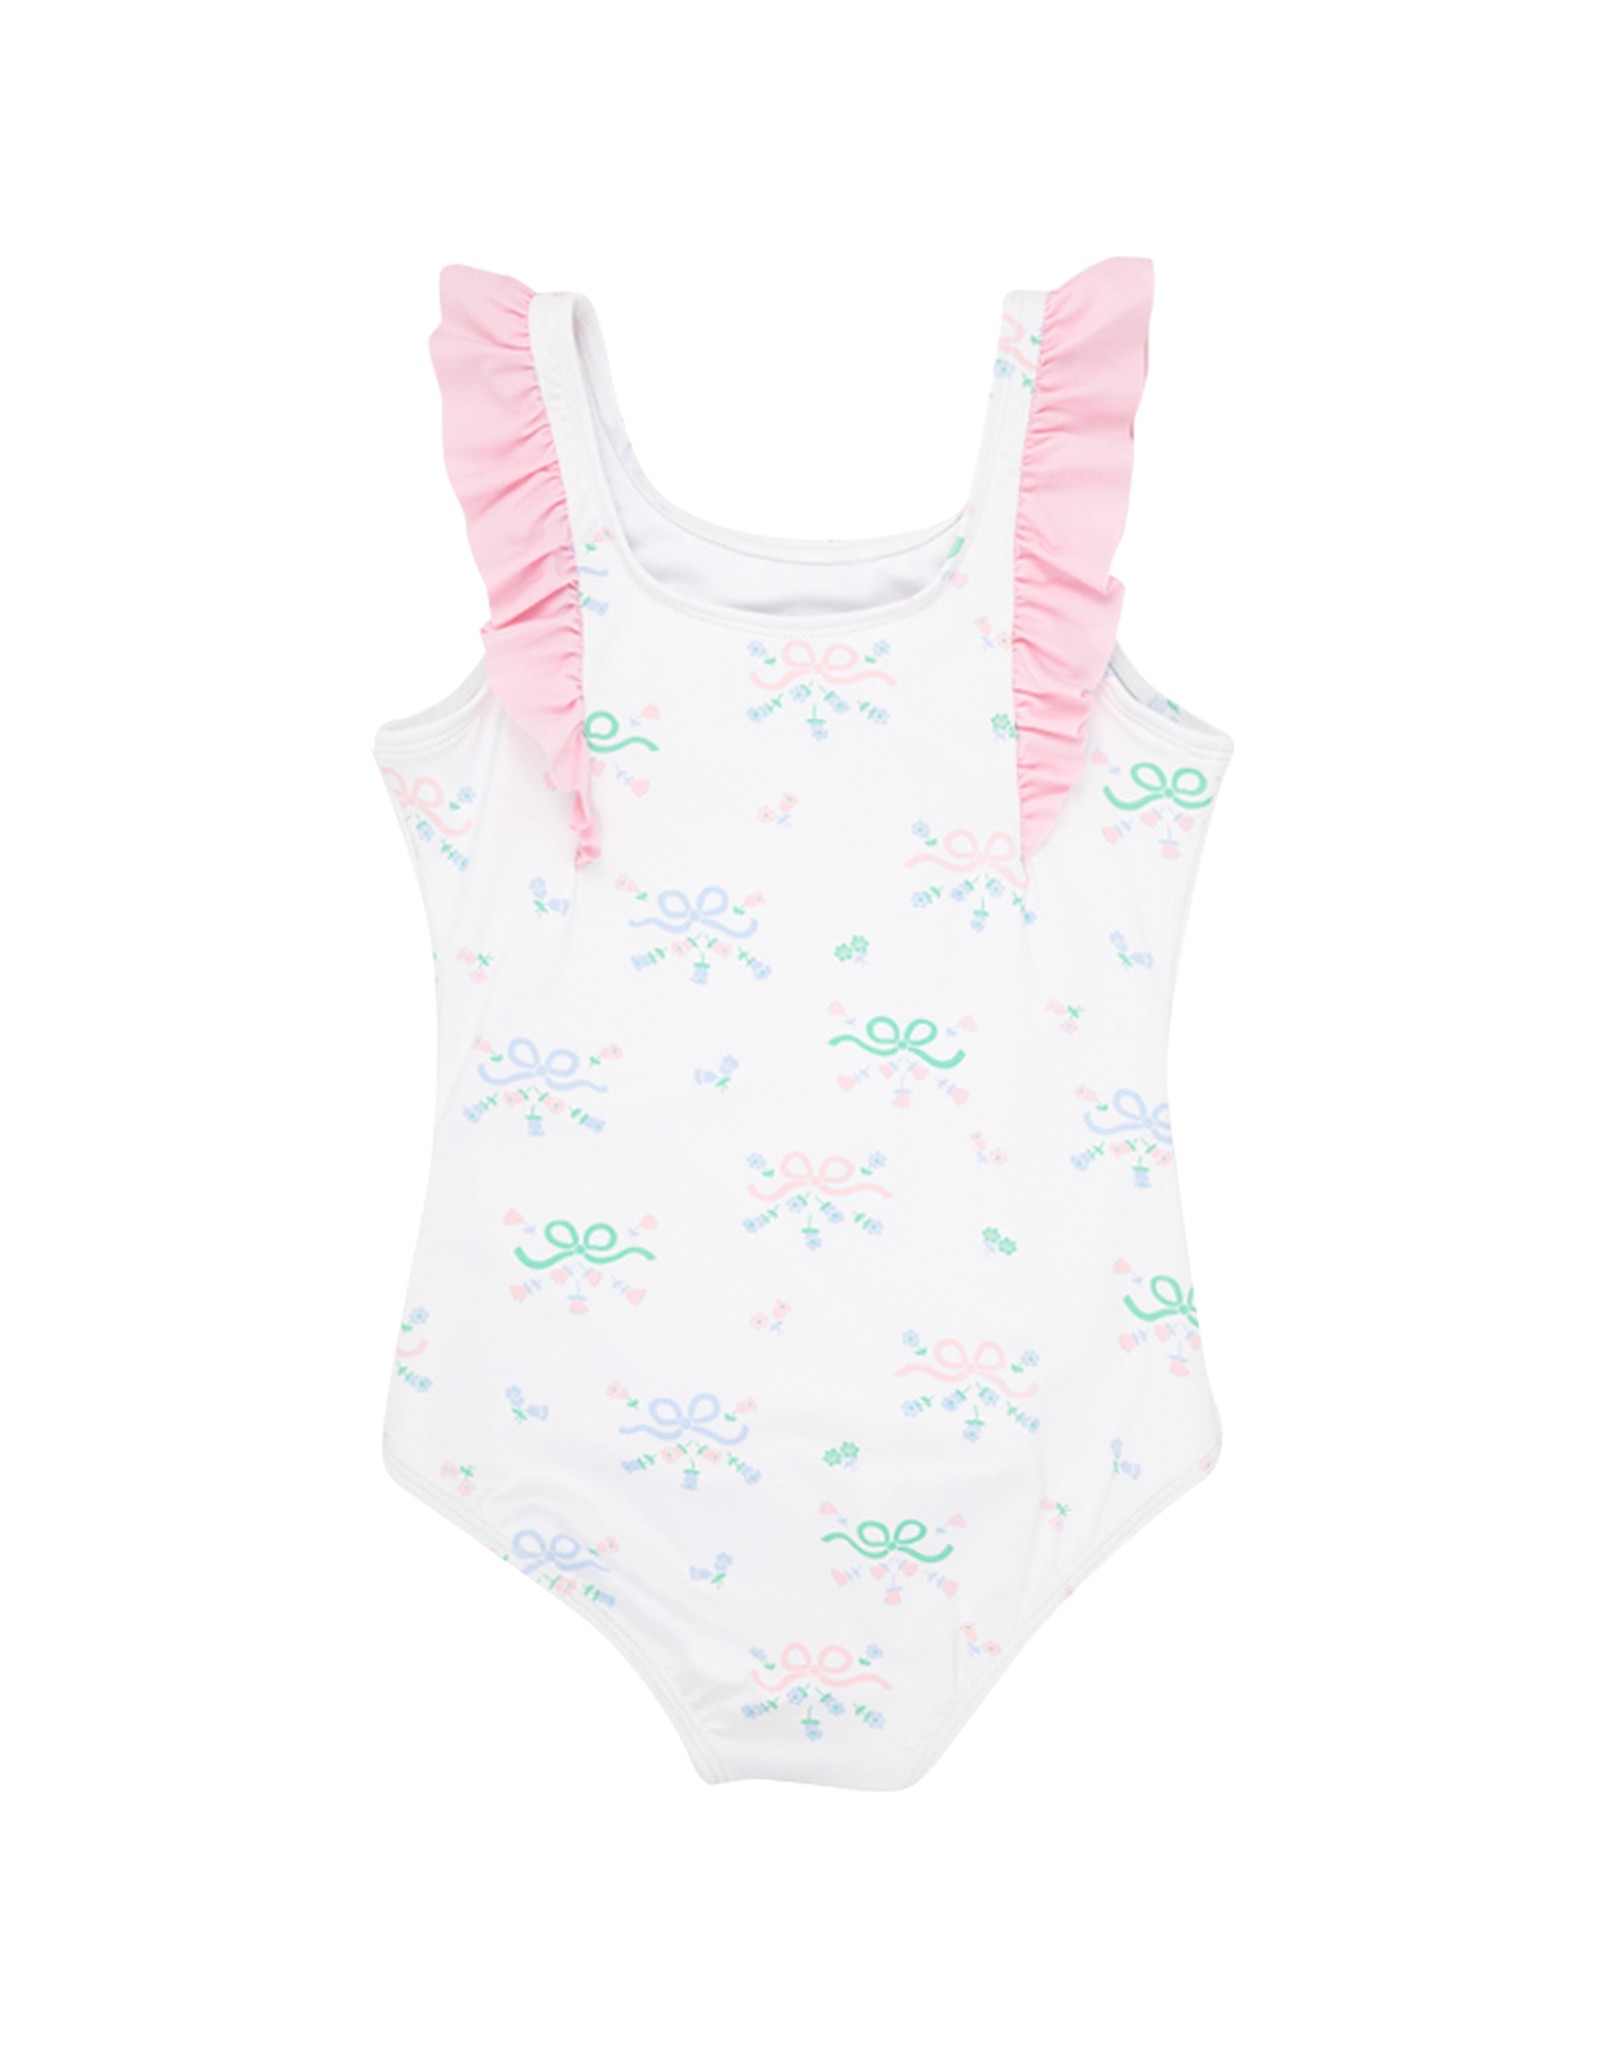 TBBC Bowhicket Bathing Suit Grandmillenial-esque/Pink